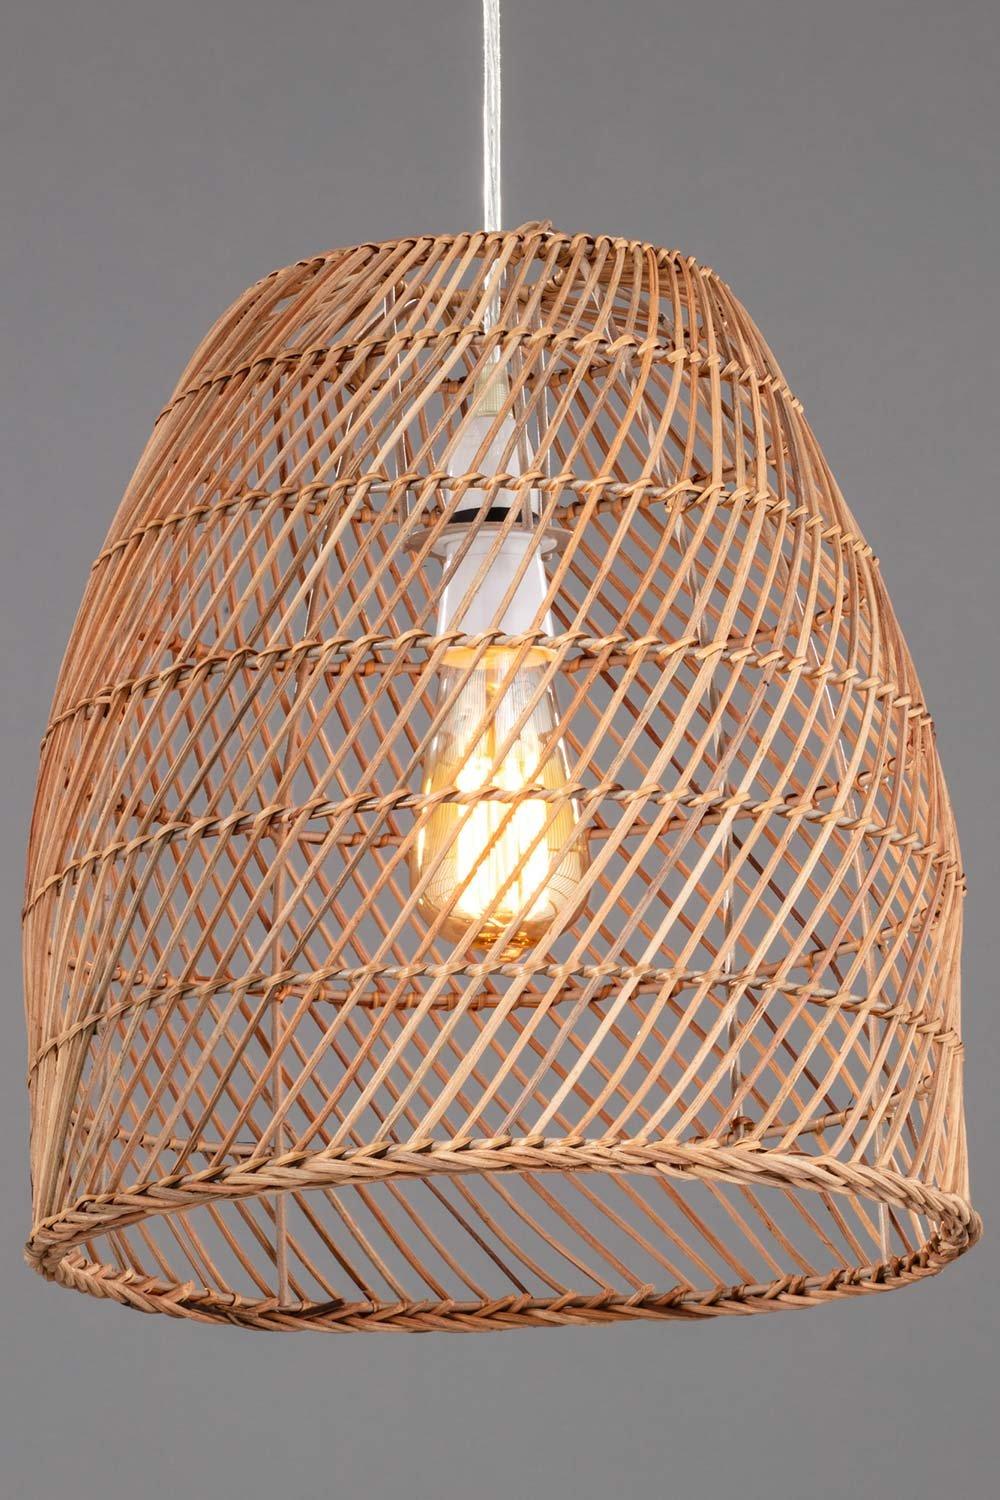 Tall Dome Easy Fit Light Shade